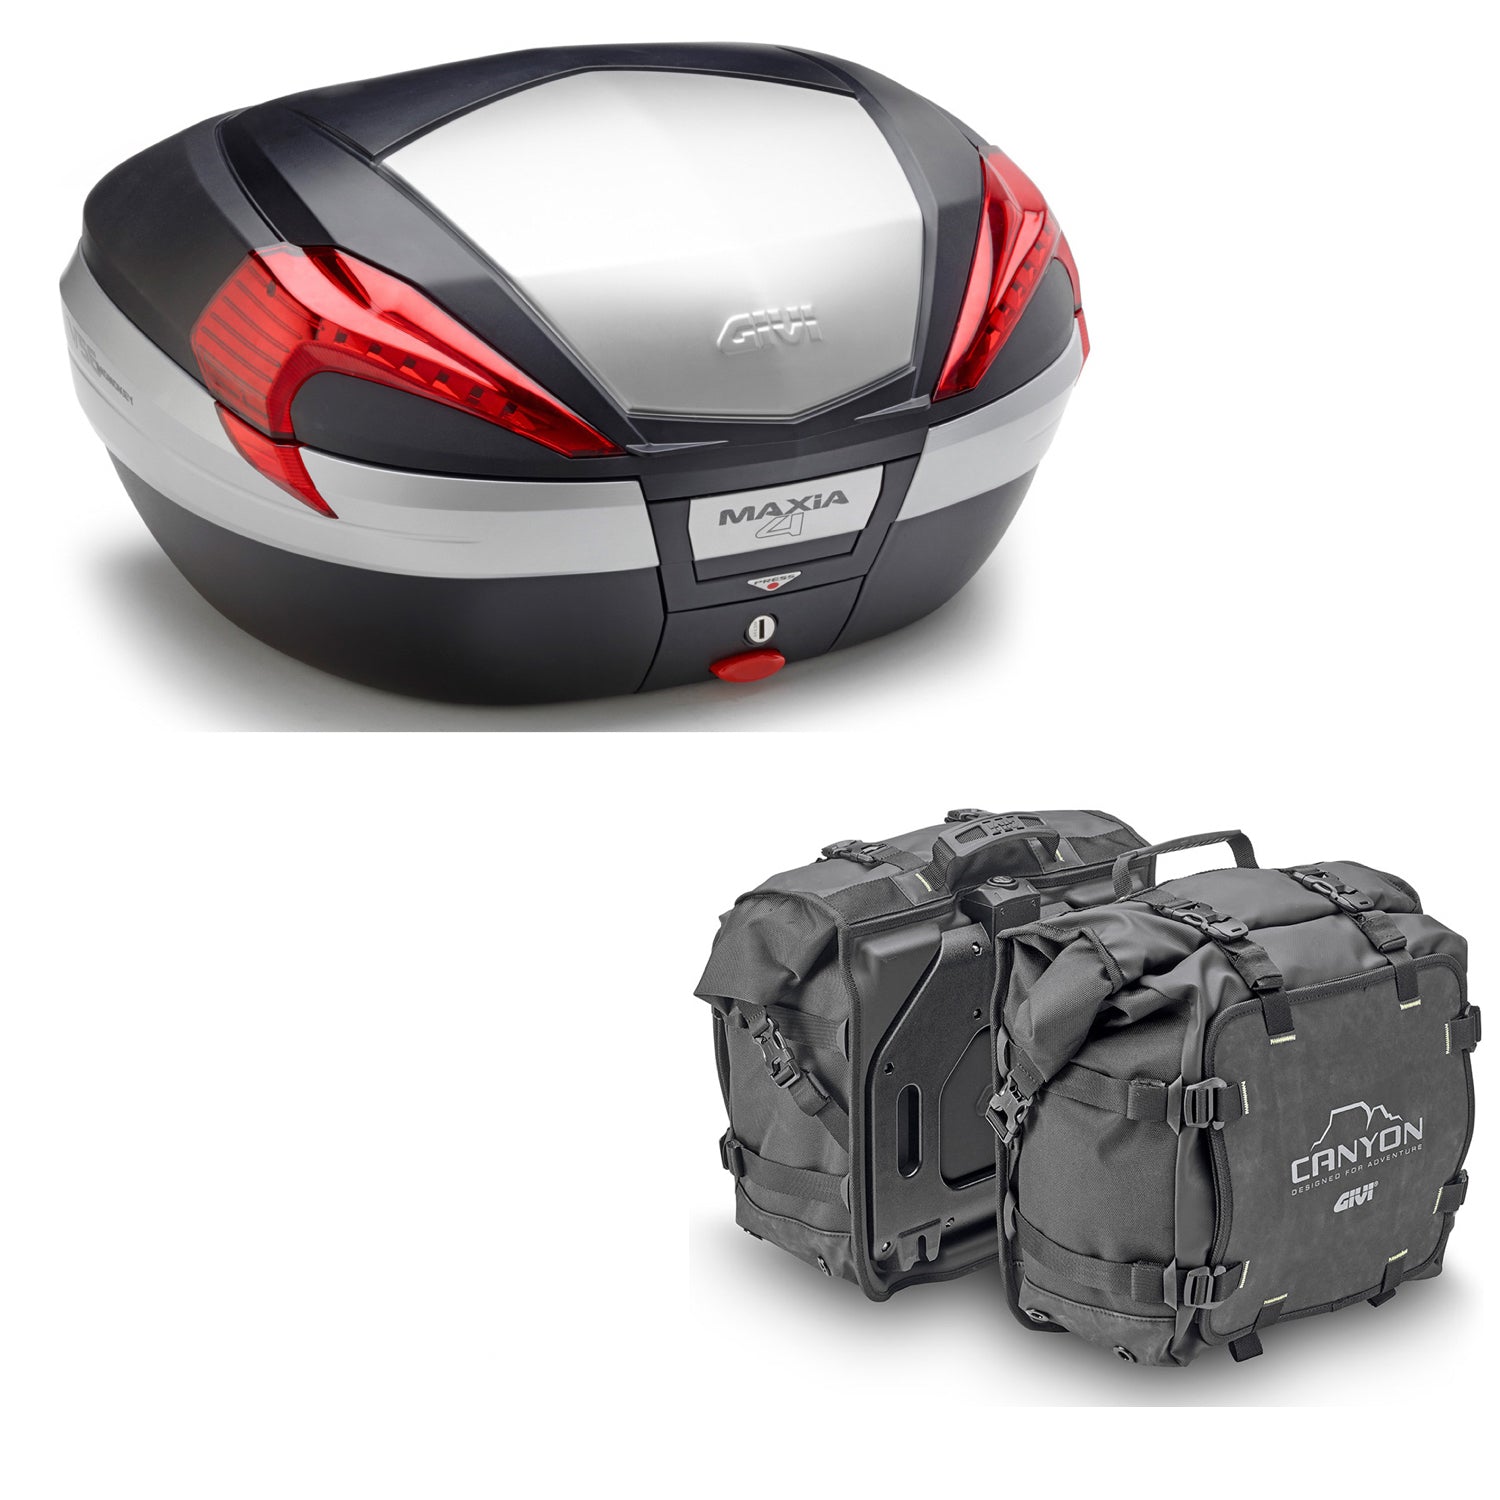 GIVI BAULETTO MAXIA 4 V56N + VALIGIE LATERALI CANYON GRT720 COMPATIBILE CON YAMAHA TRACER 900 GT 18/20